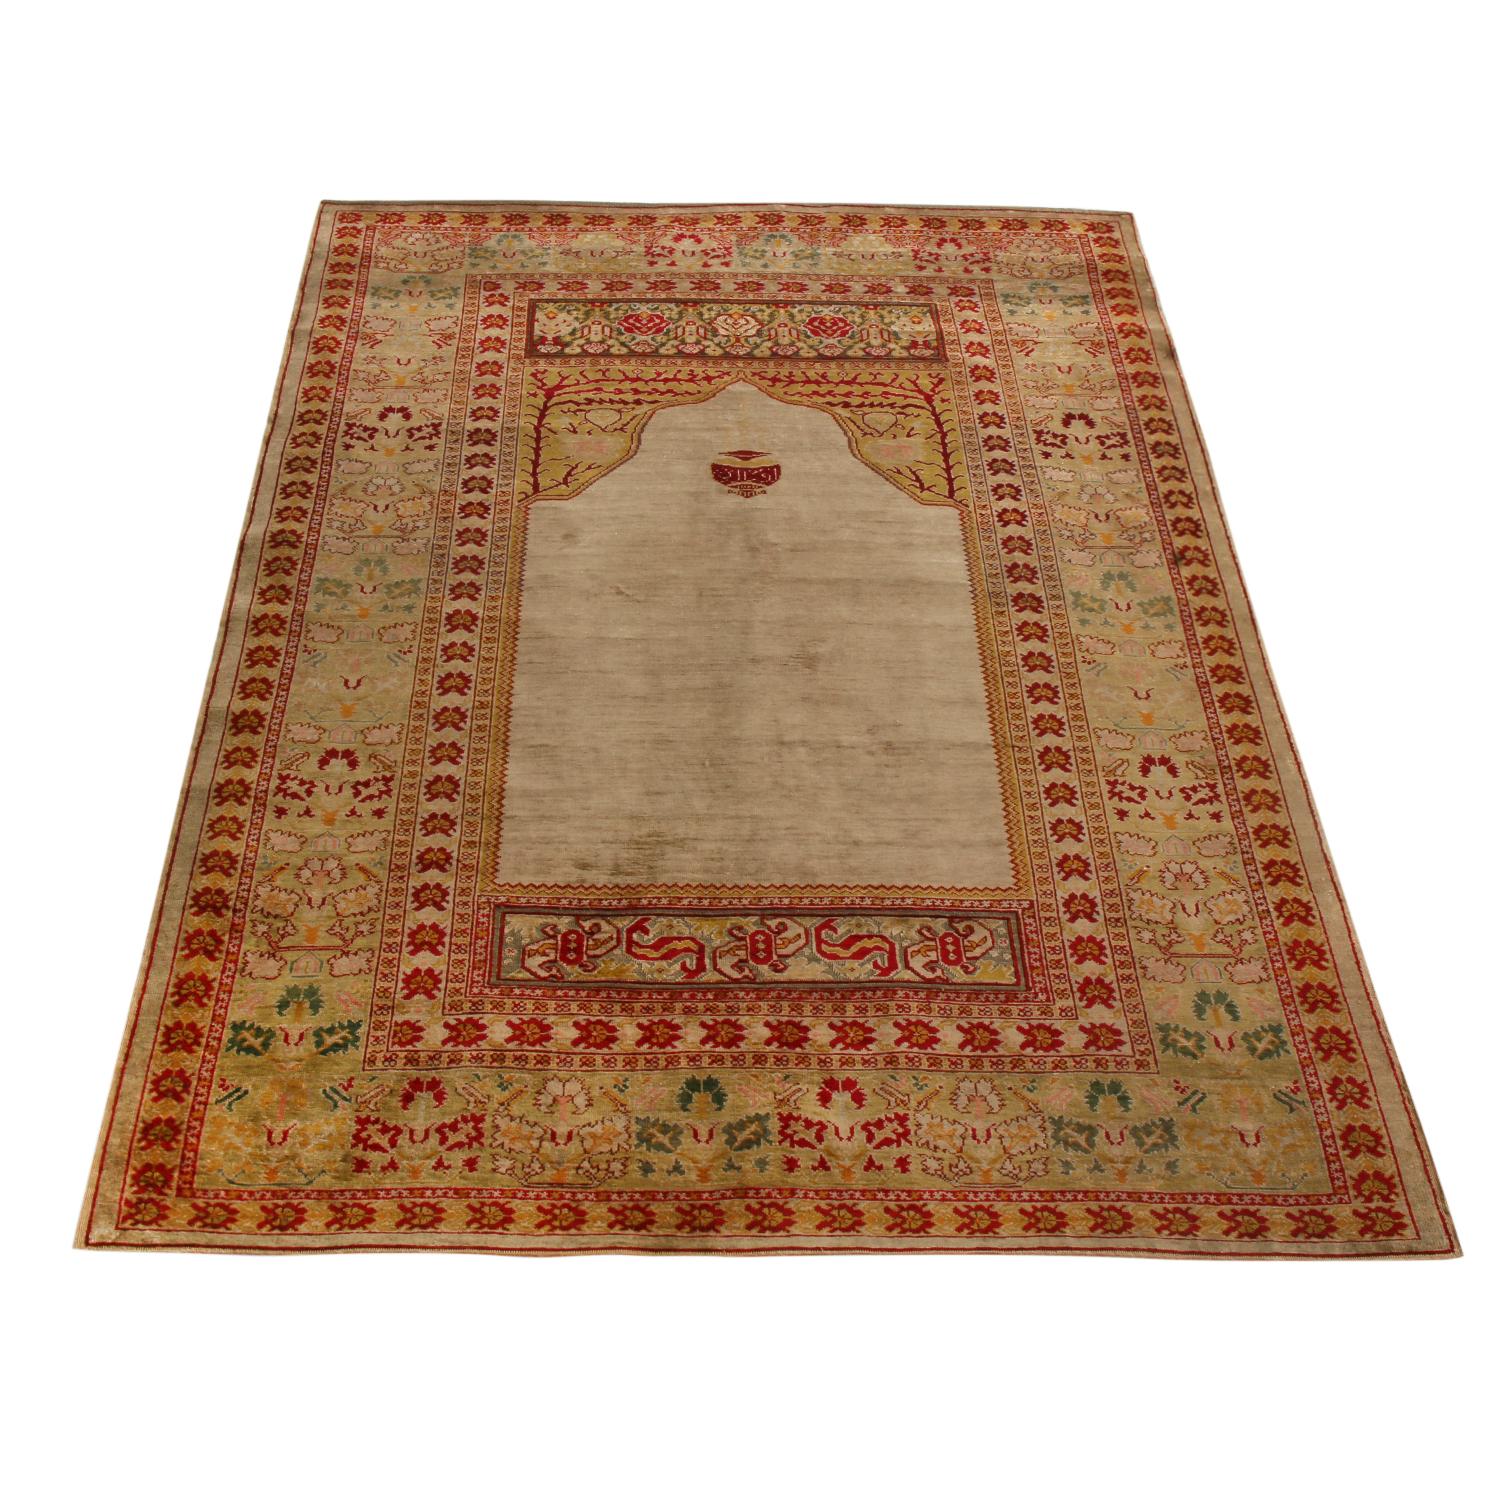 Dancing curvilinear patterns paired with a classic sense of eastern symmetry lend this antique Hereke rug tones of grandeur and whimsy alike. Originating from Turkey between 1910-1920, this piece enjoys hand-knotted high-quality silk throughout the